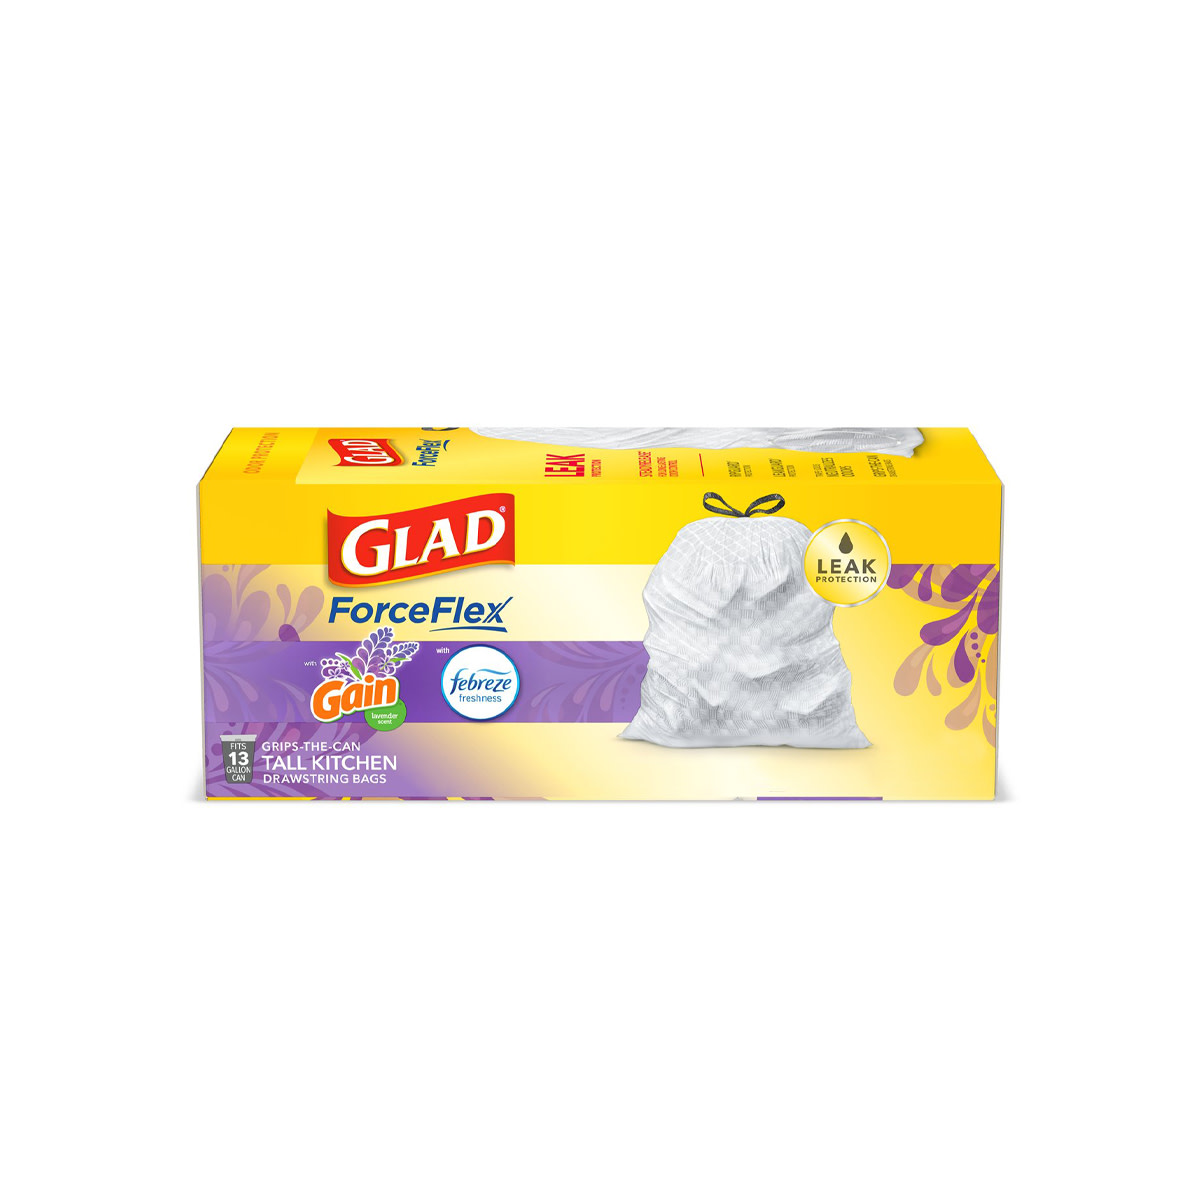 Glad® ForceFlex Trash Bags with Gain Lavender Scent